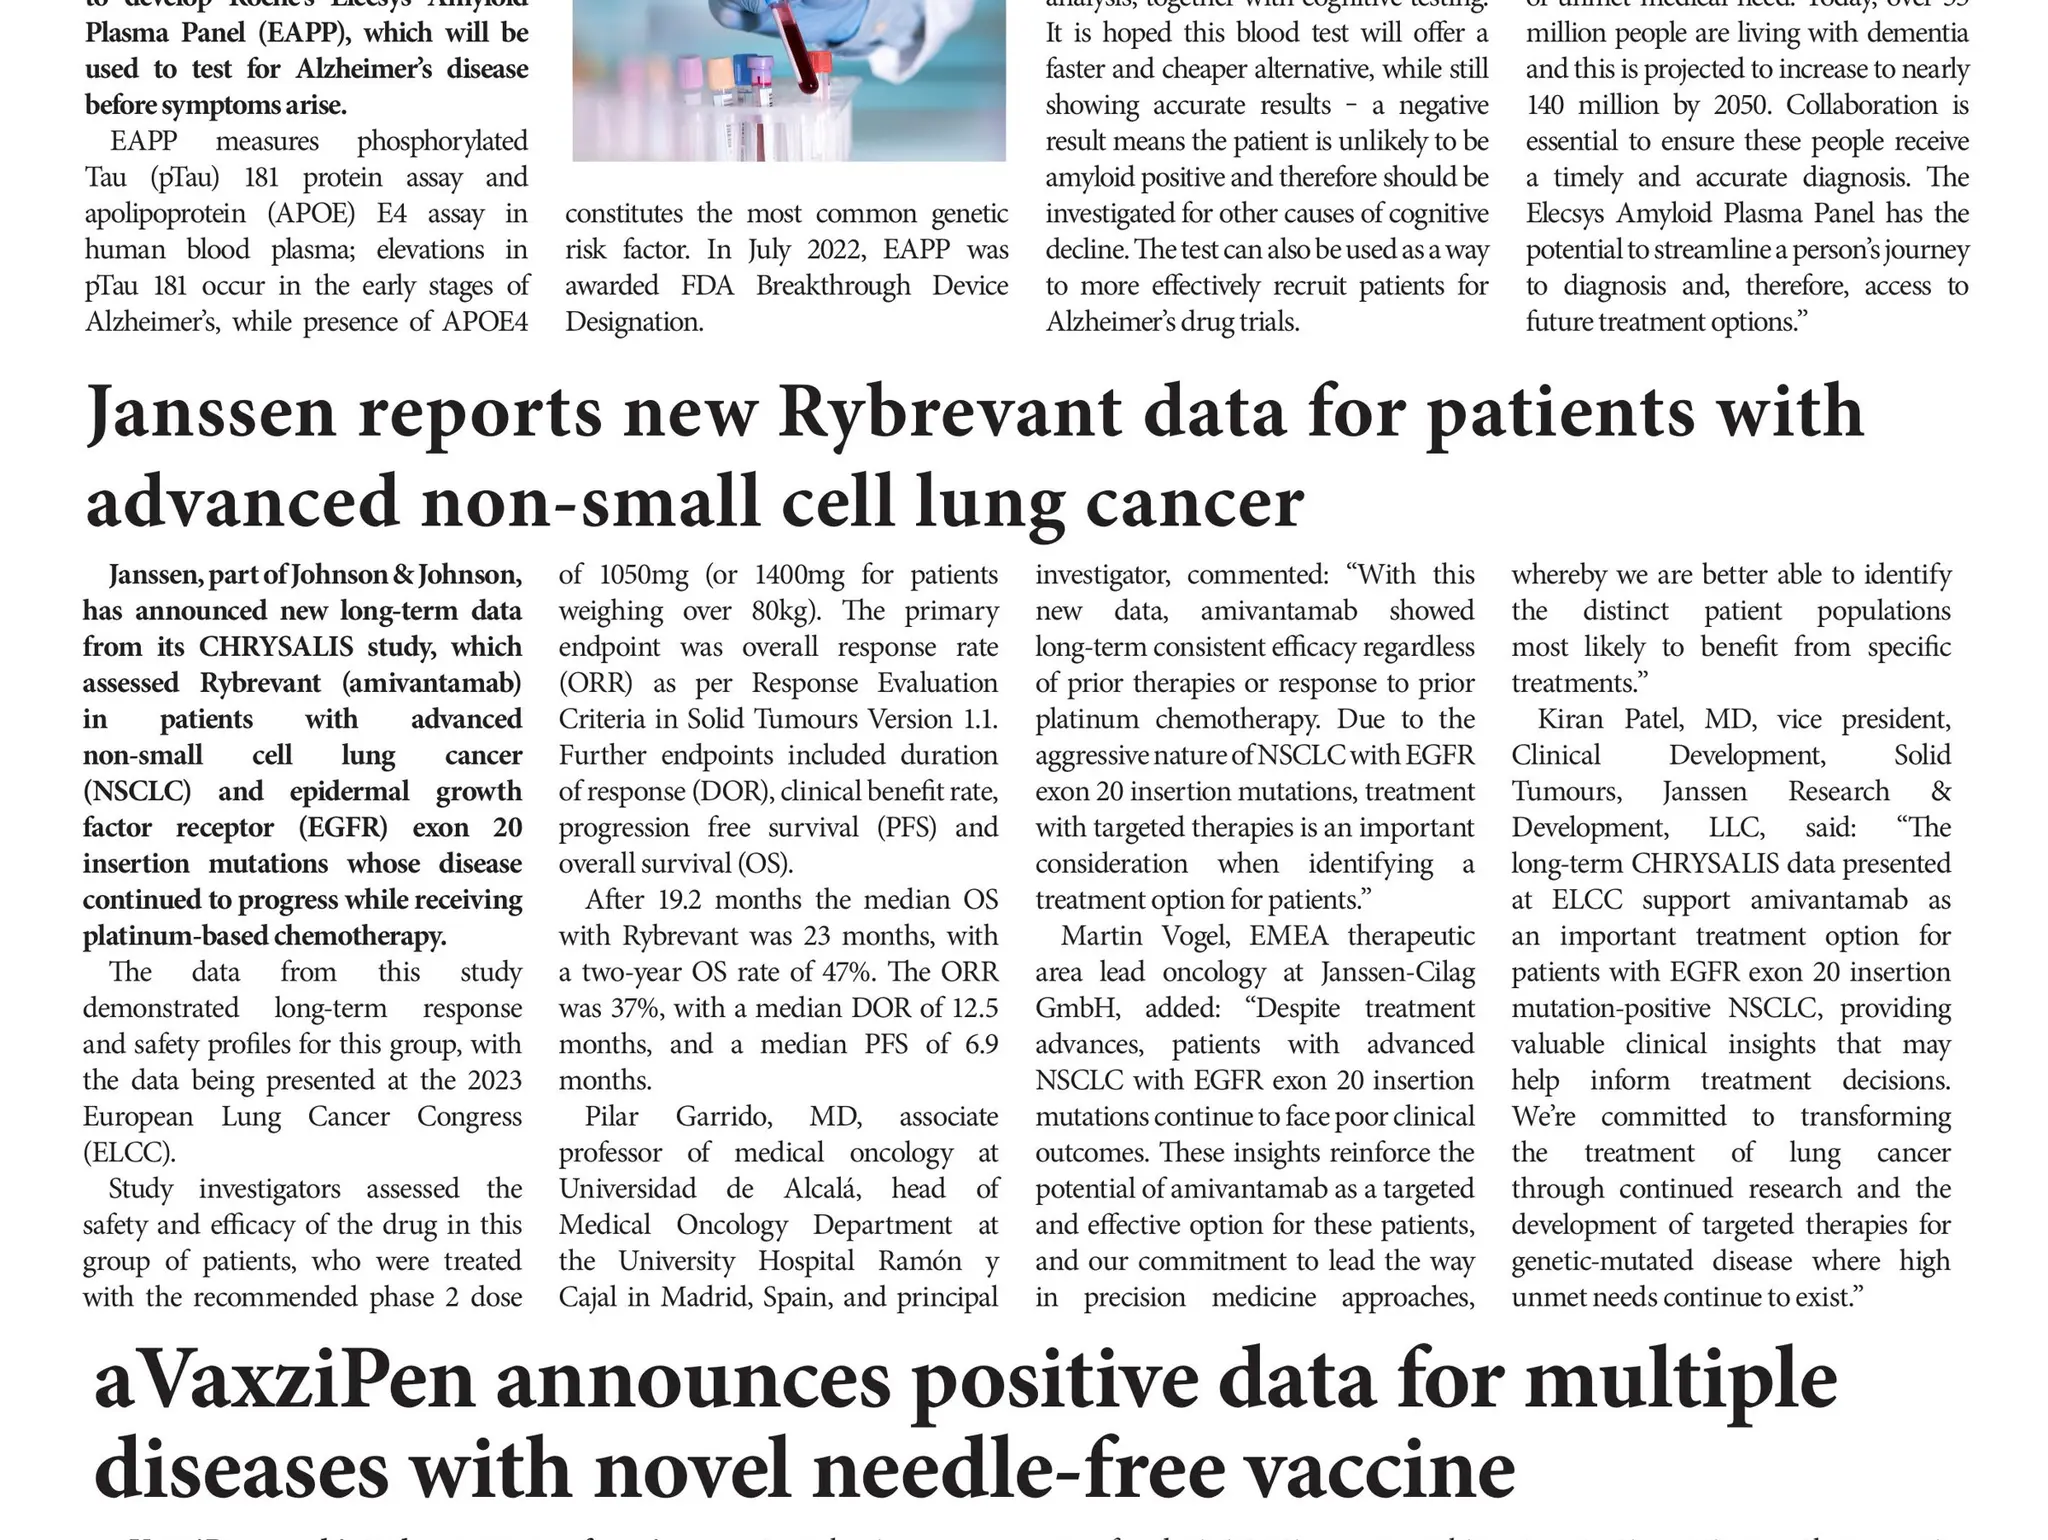 Janssen reports new Rybrevant data for patients with advanced non-small cell lung cancer